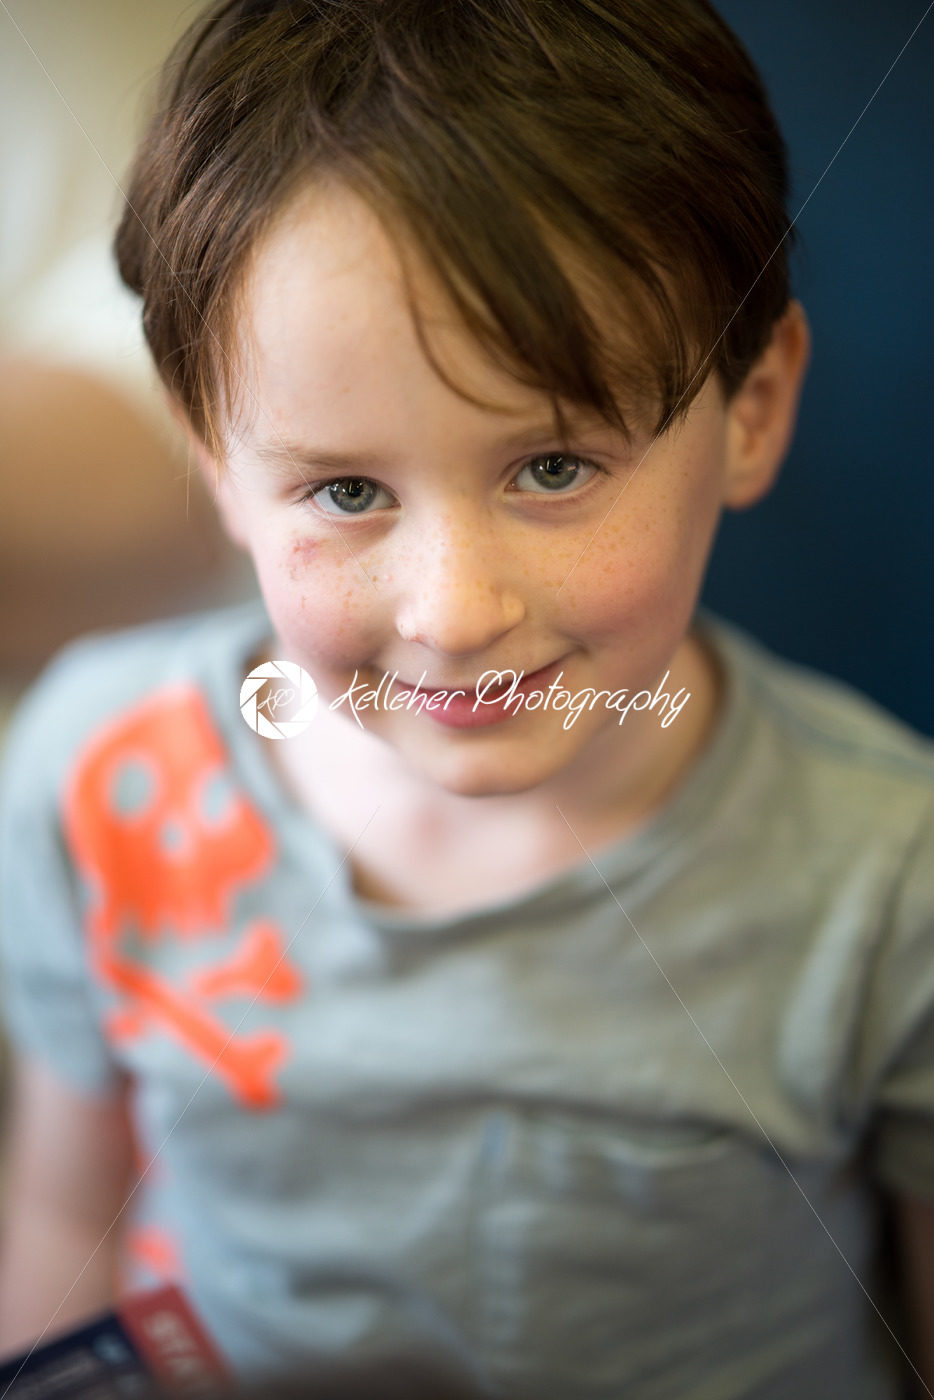 Close Portrait of Boy Smiling Sitting Down - Kelleher Photography Store